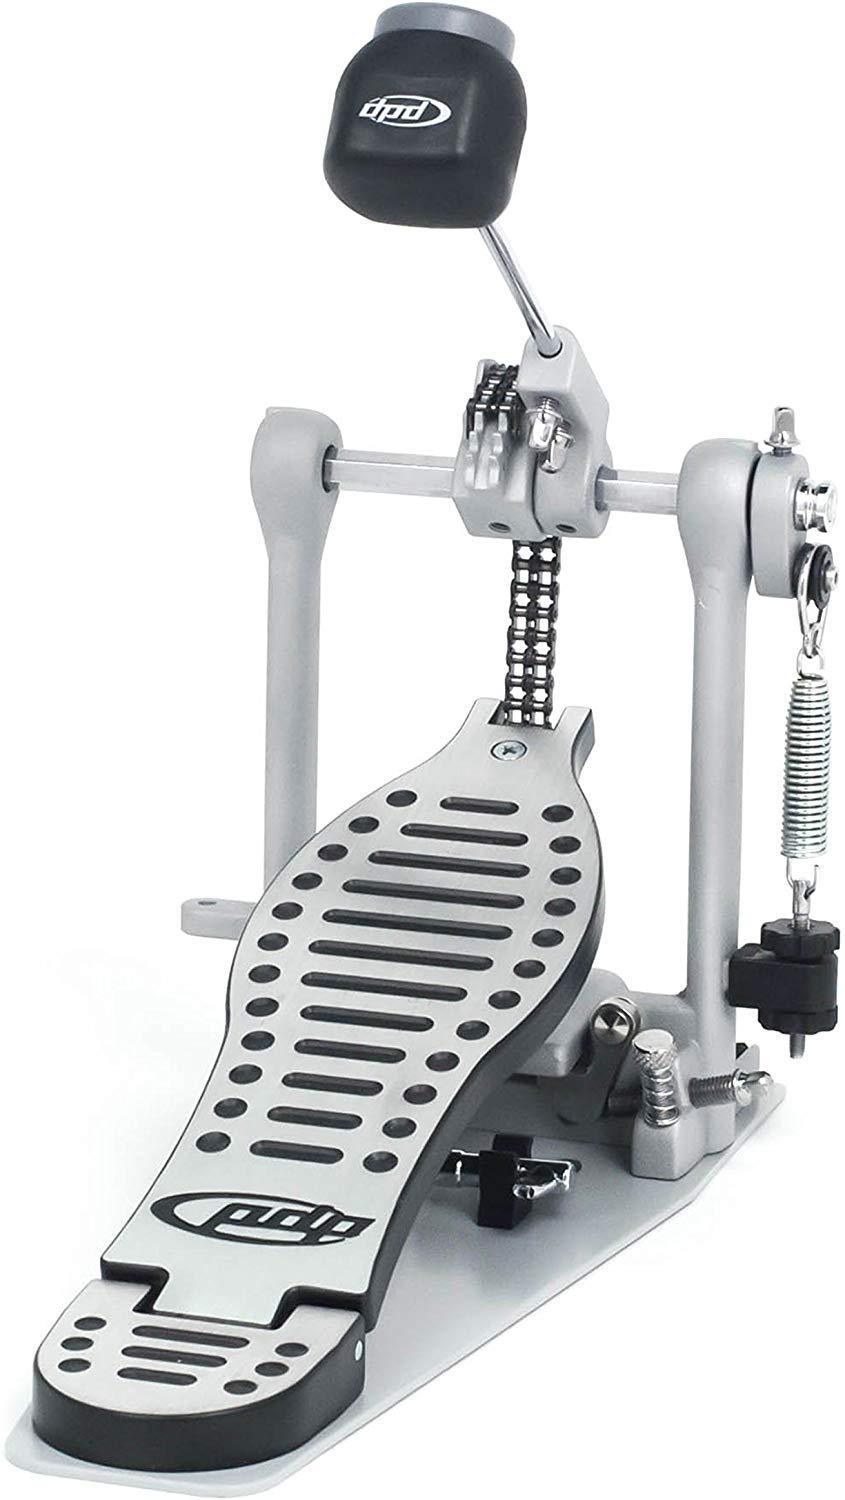 5 Best Single Drum Pedals in 2021 [Reviews & Buying Guide]